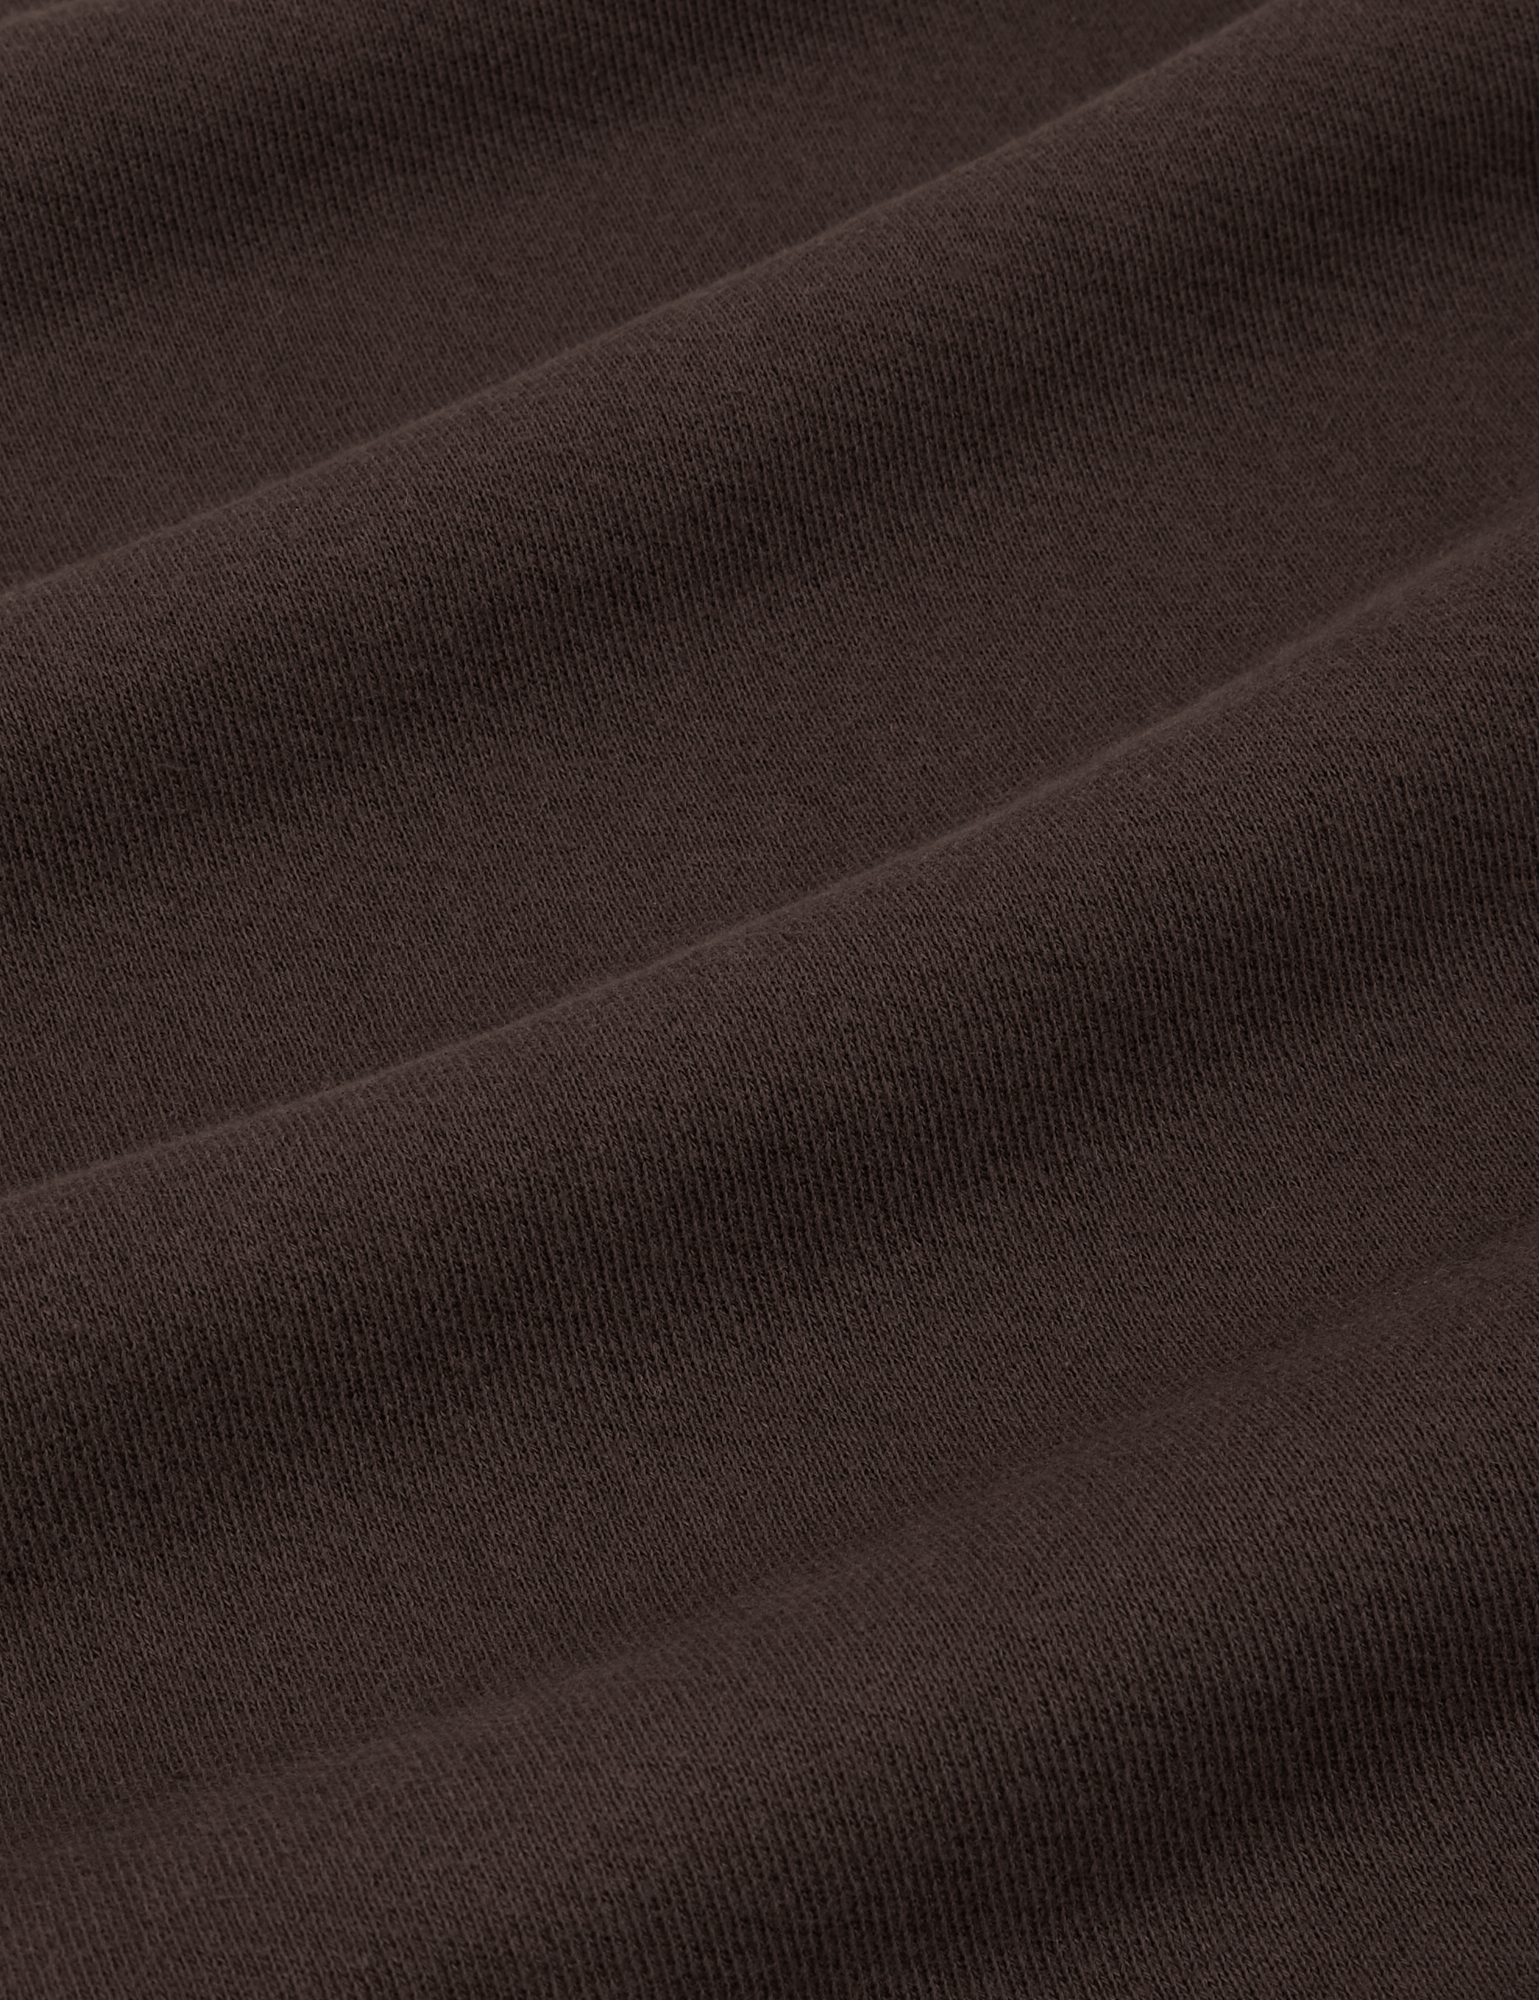 Cropped Zip Hoodie in Espresso Brown fabric detail close up